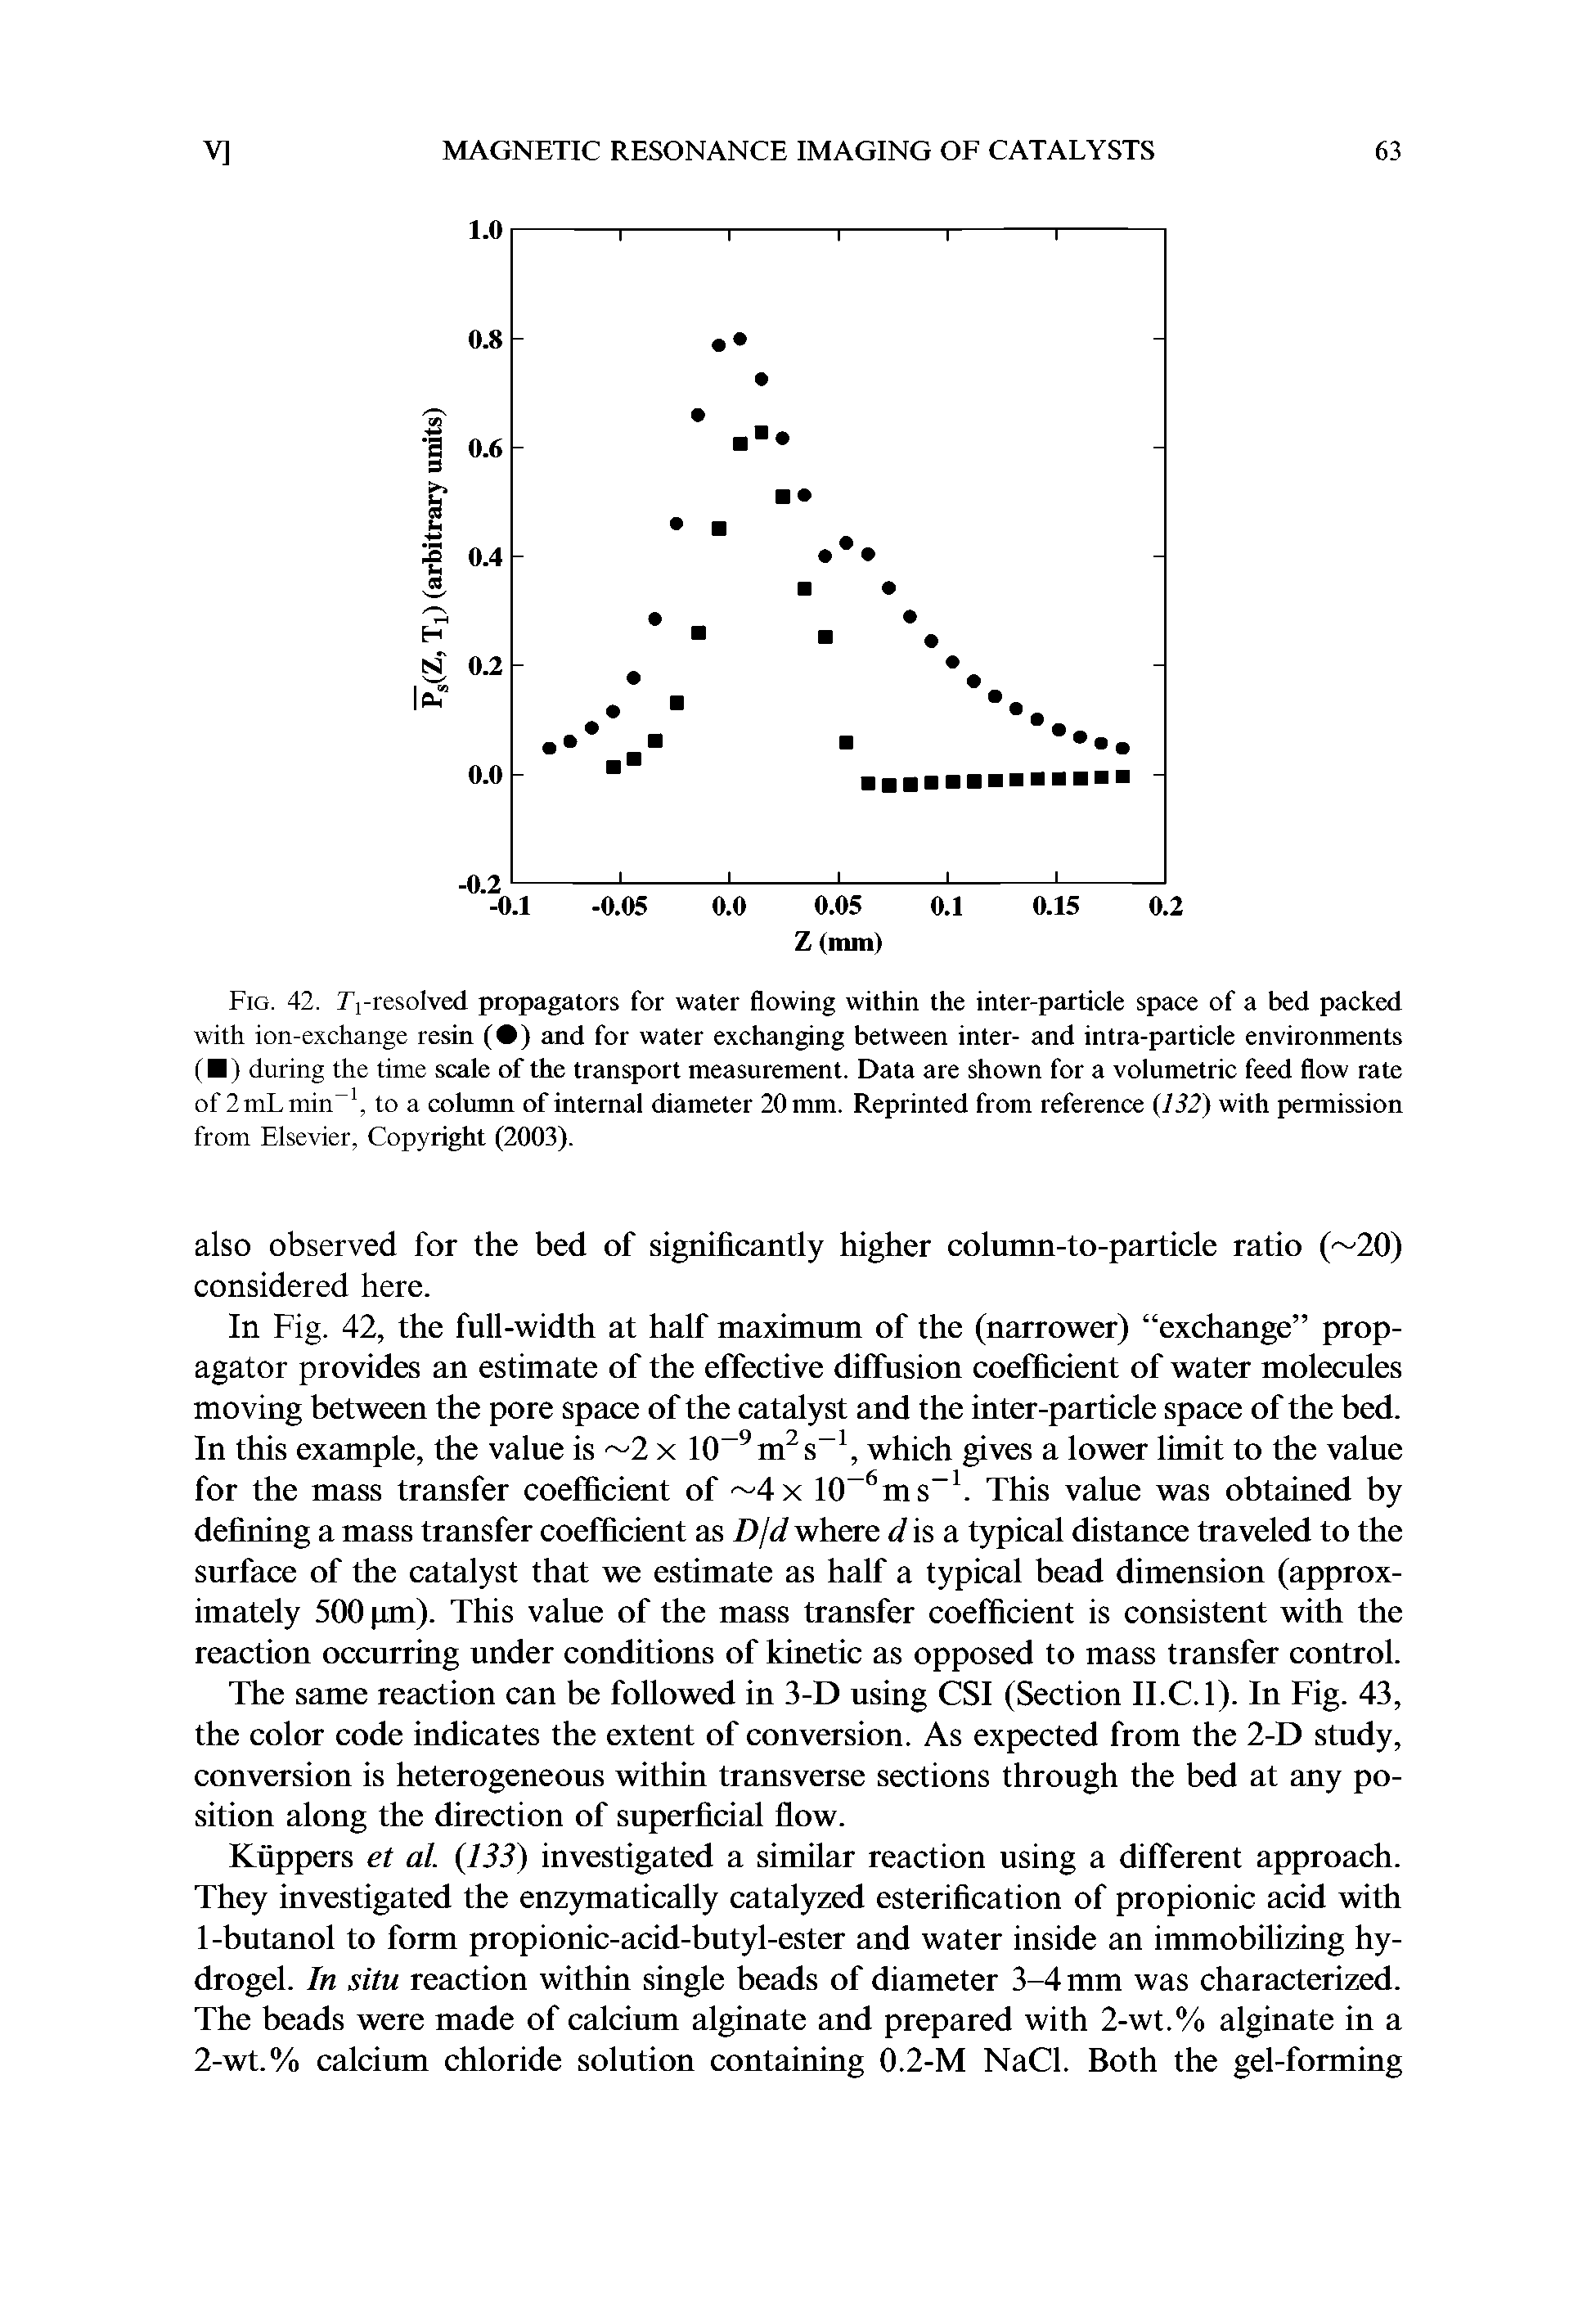 Fig. 42. Ti-resolved propagators for water flowing within the inter-particle space of a bed packed with ion-exchange resin ( ) and for water exchanging between inter- and intra-particle environments ( ) during the time scale of the transport measurement. Data are shown for a volumetric feed flow rate of 2inl,inin. to a column of internal diameter 20 mm. Reprinted from reference (J32) with permission from Elsevier, Copyright (2003).